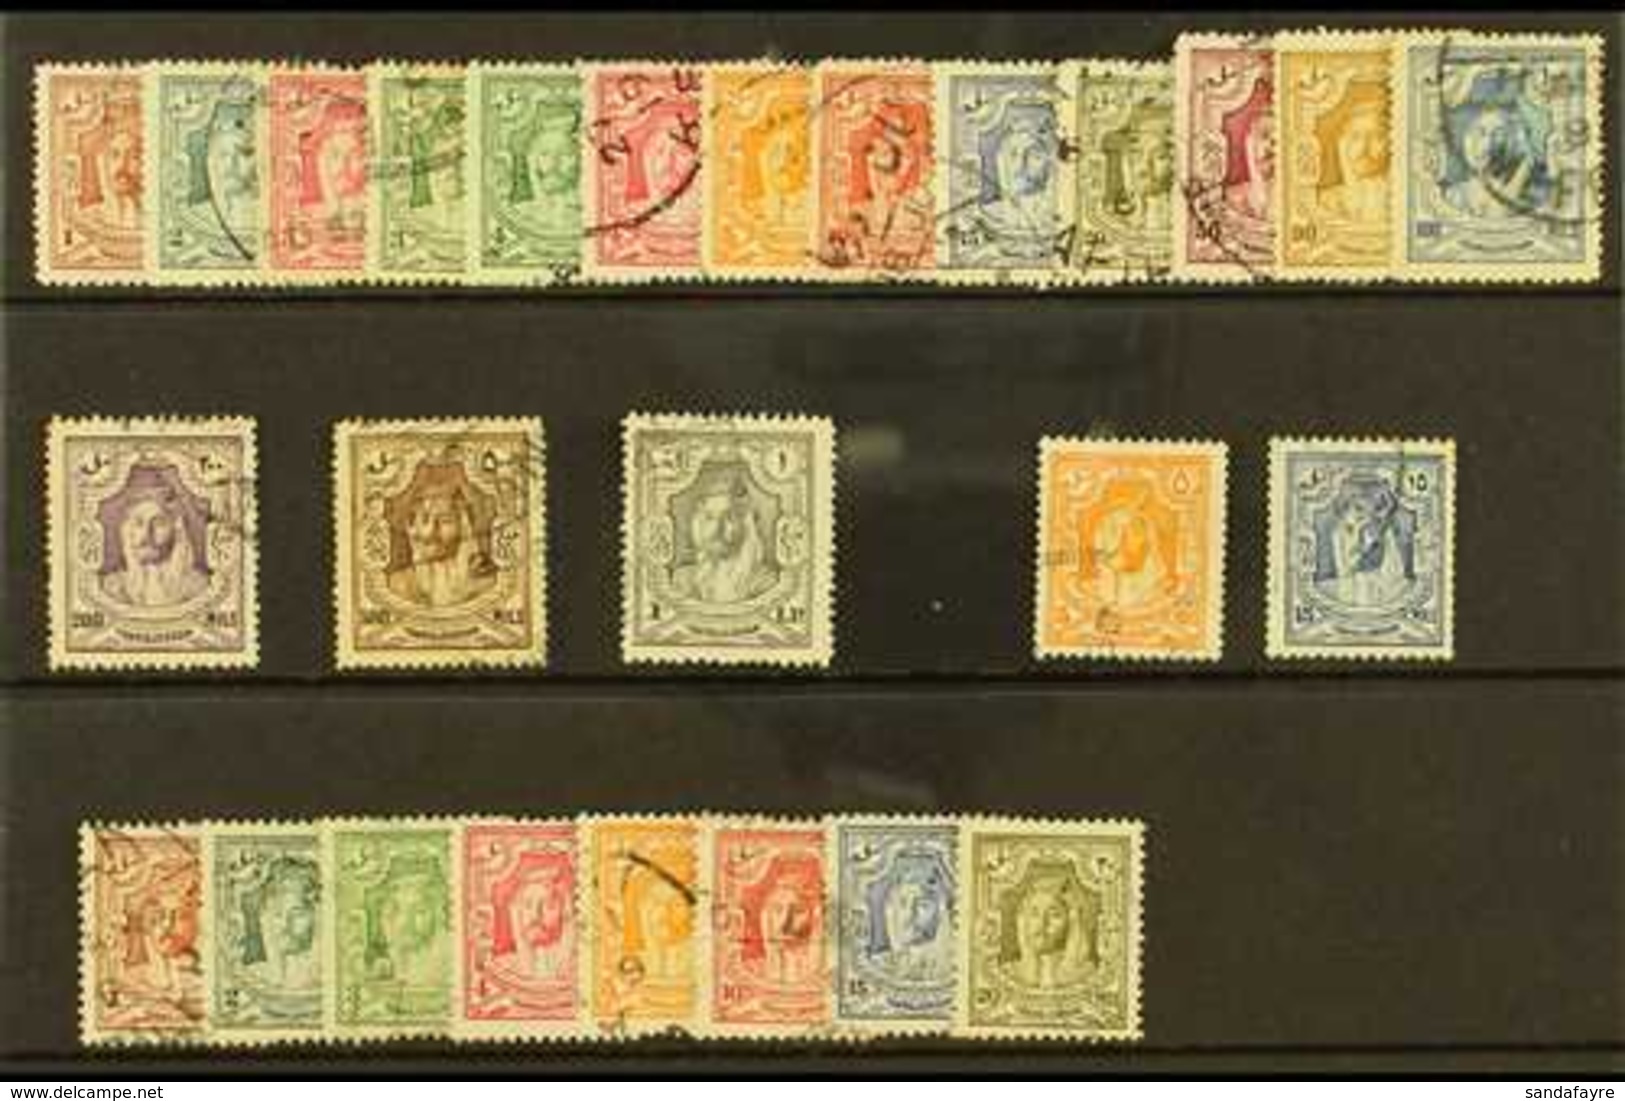 1930  Emir Set Re-engraved Complete Including All SG Listed Perf Types, SG 194b/207, Fine To Very Fine Used. (26 Stamps) - Jordan